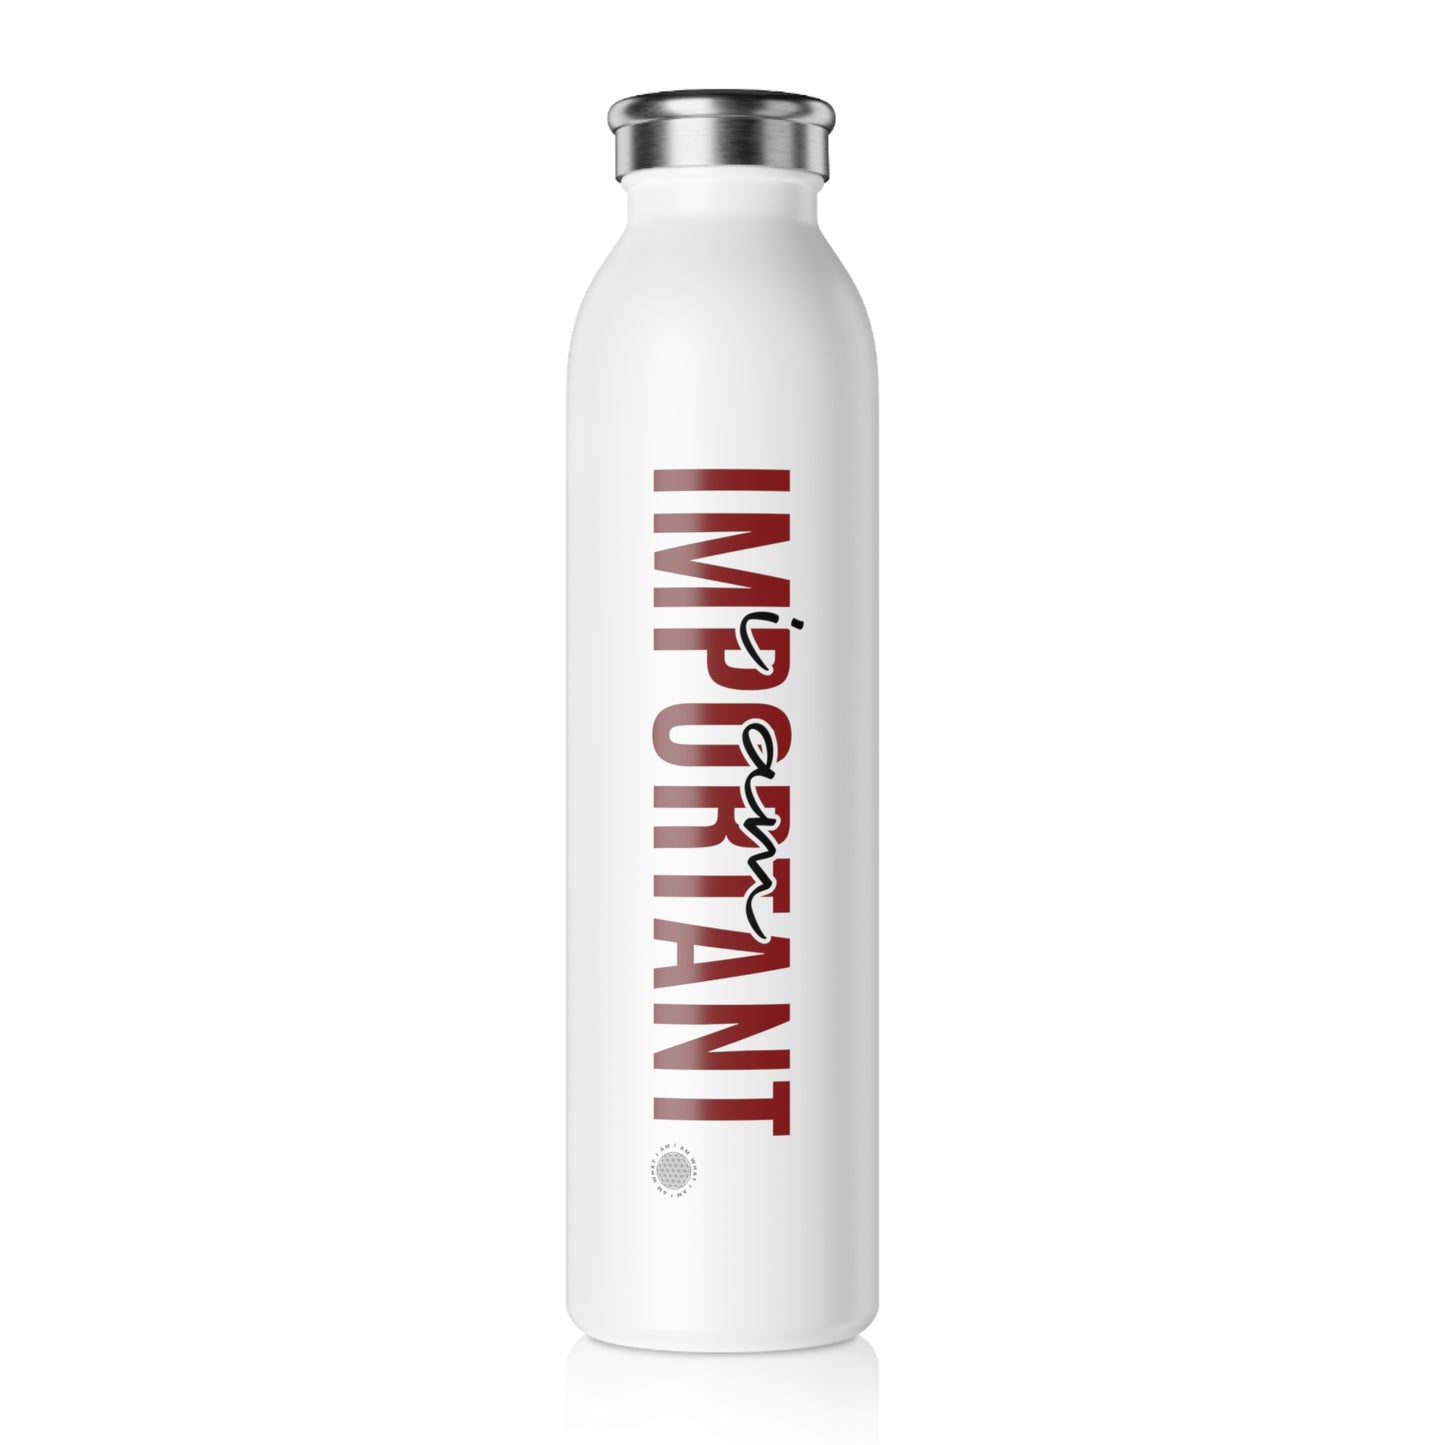 Our I Am Important affirmation water bottle is one of our positive affirmations for mental health. Positive thinking keeps our mindset happy and healthy. This personalized water bottle was designed to become a creator’s favorite canvas of expression.